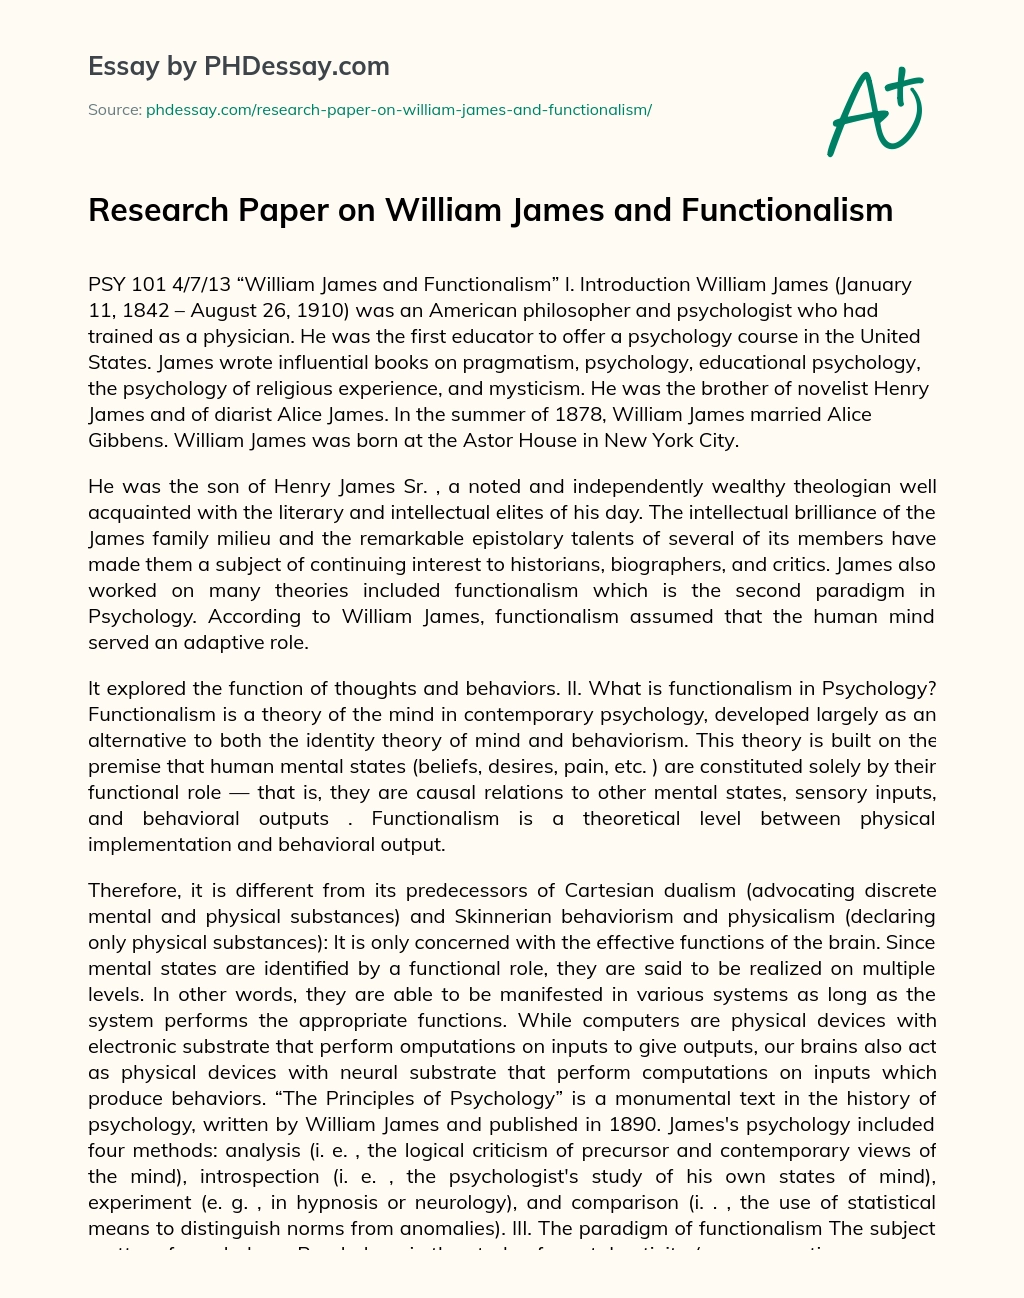 Research Paper on William James and Functionalism essay